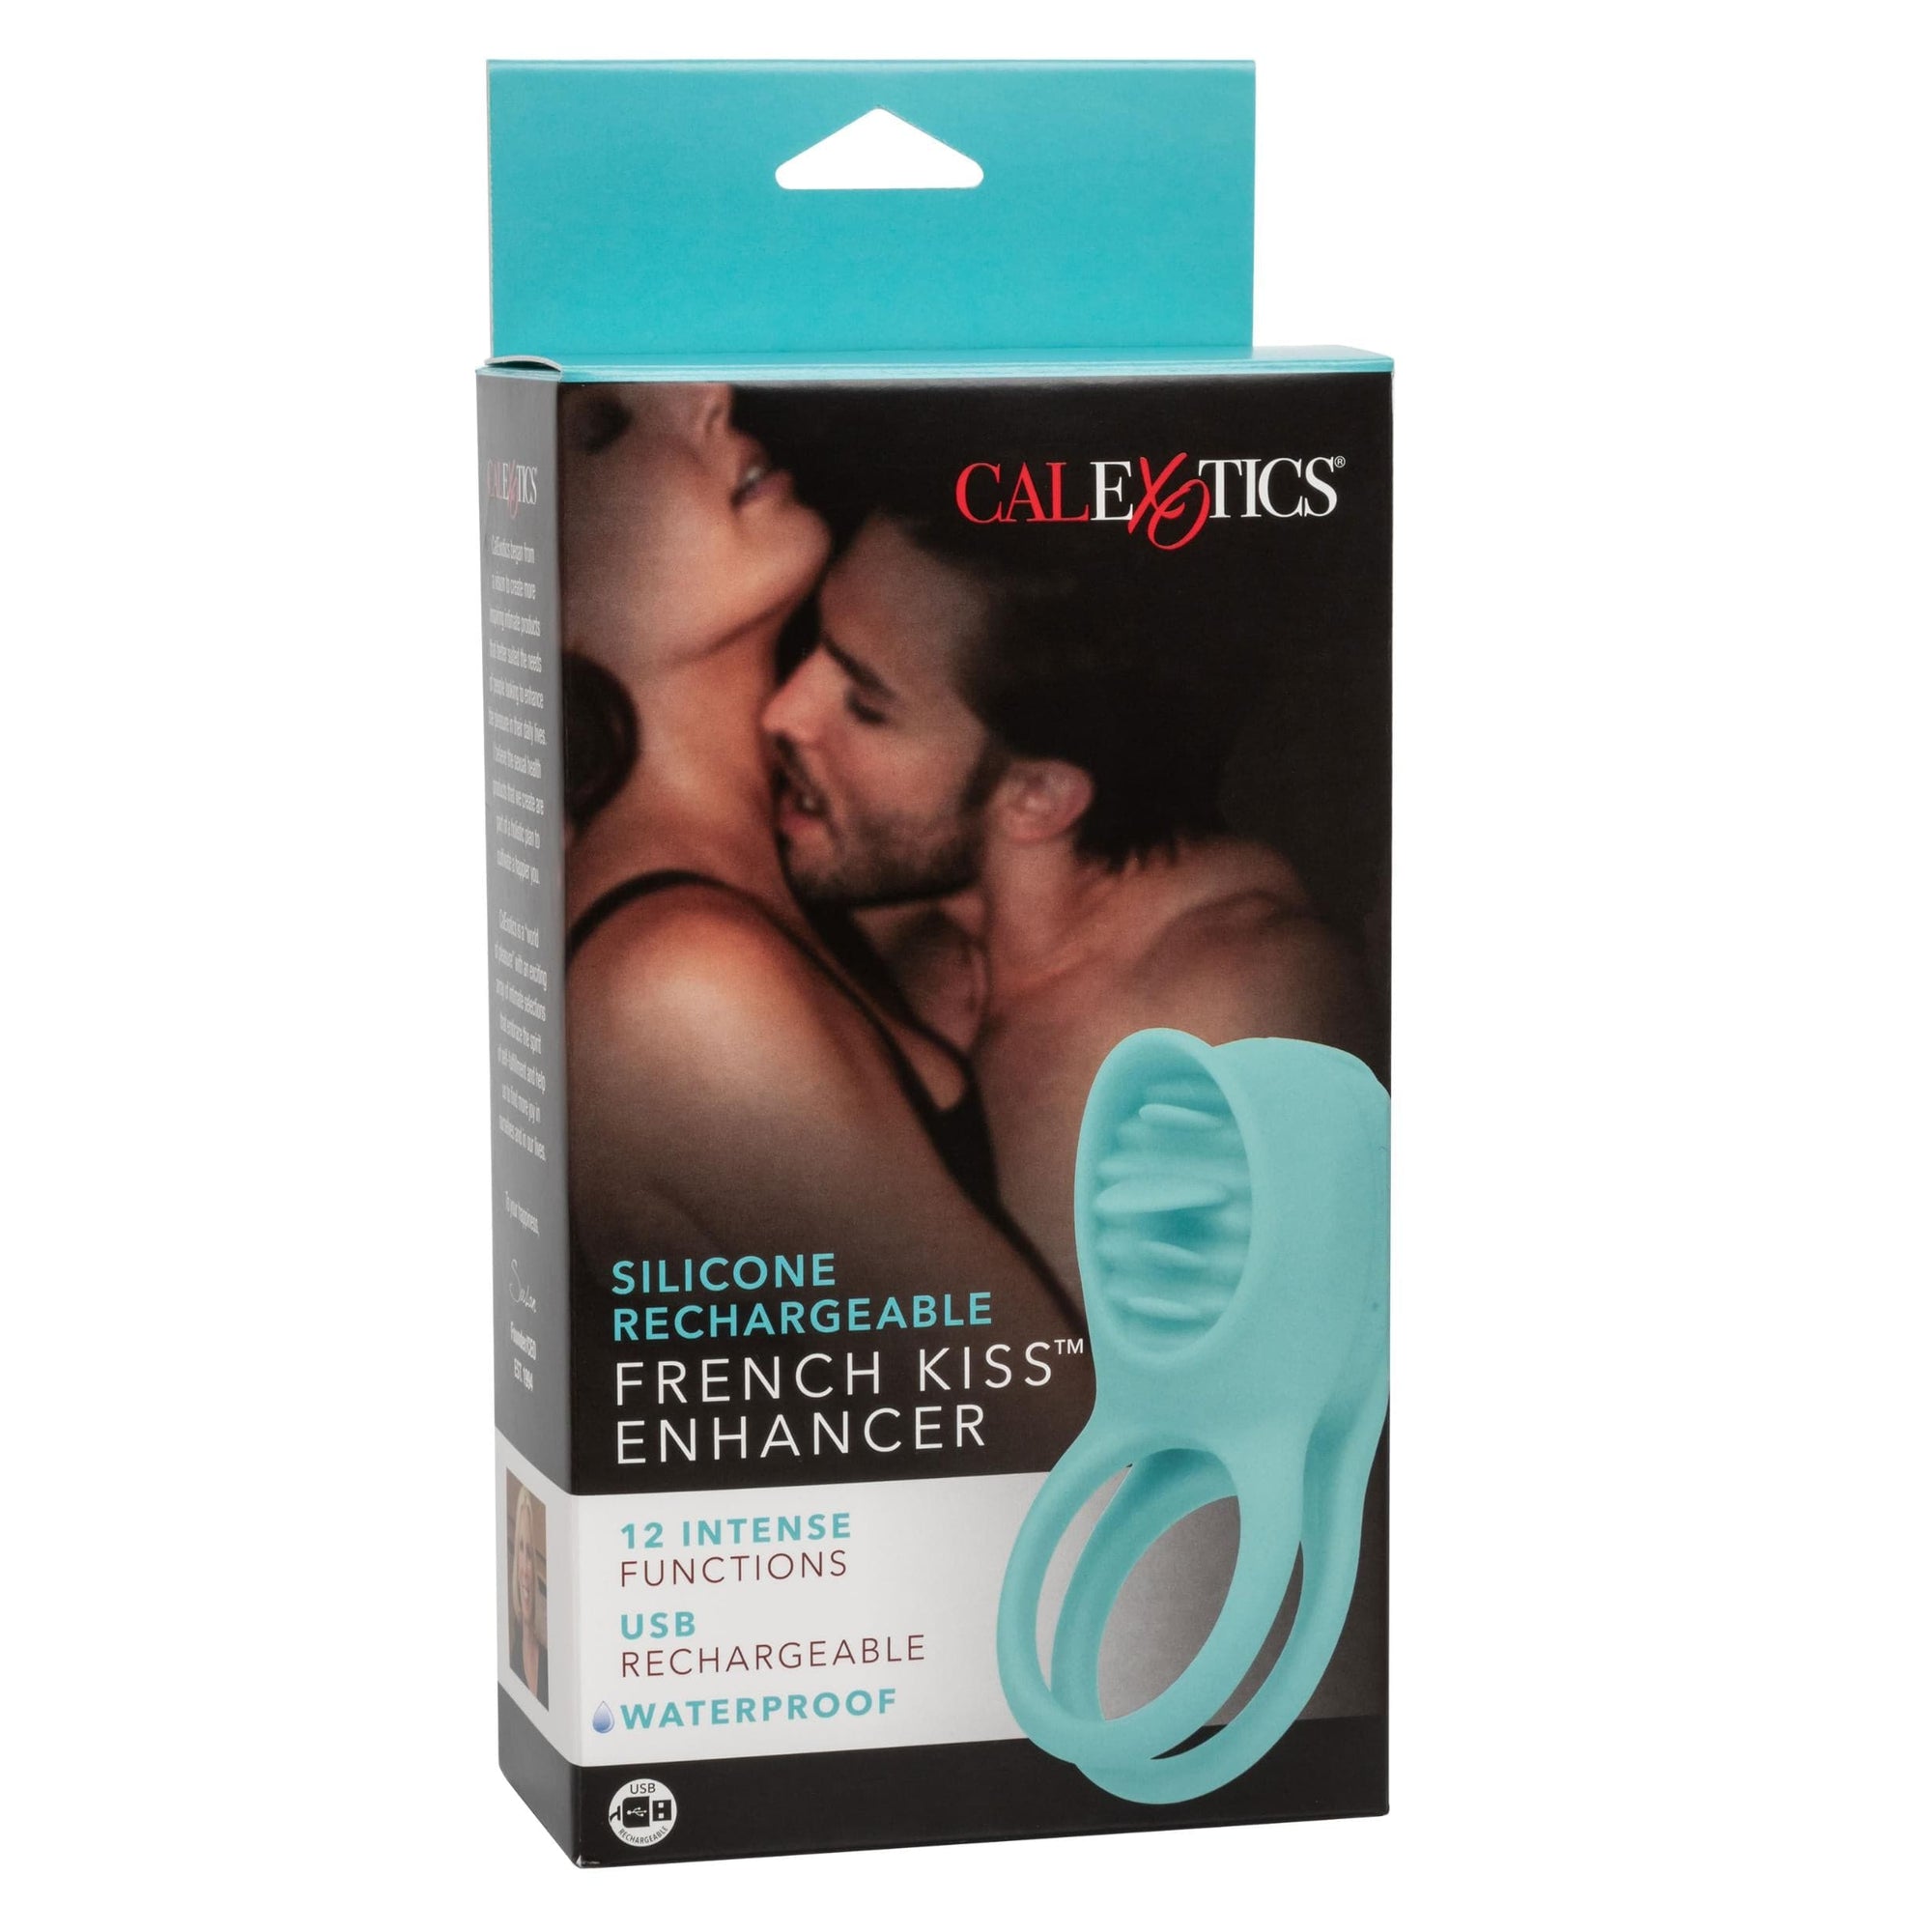 silicone rechargeable french kiss enhancer, tongue blowjob, tongue out blowjob